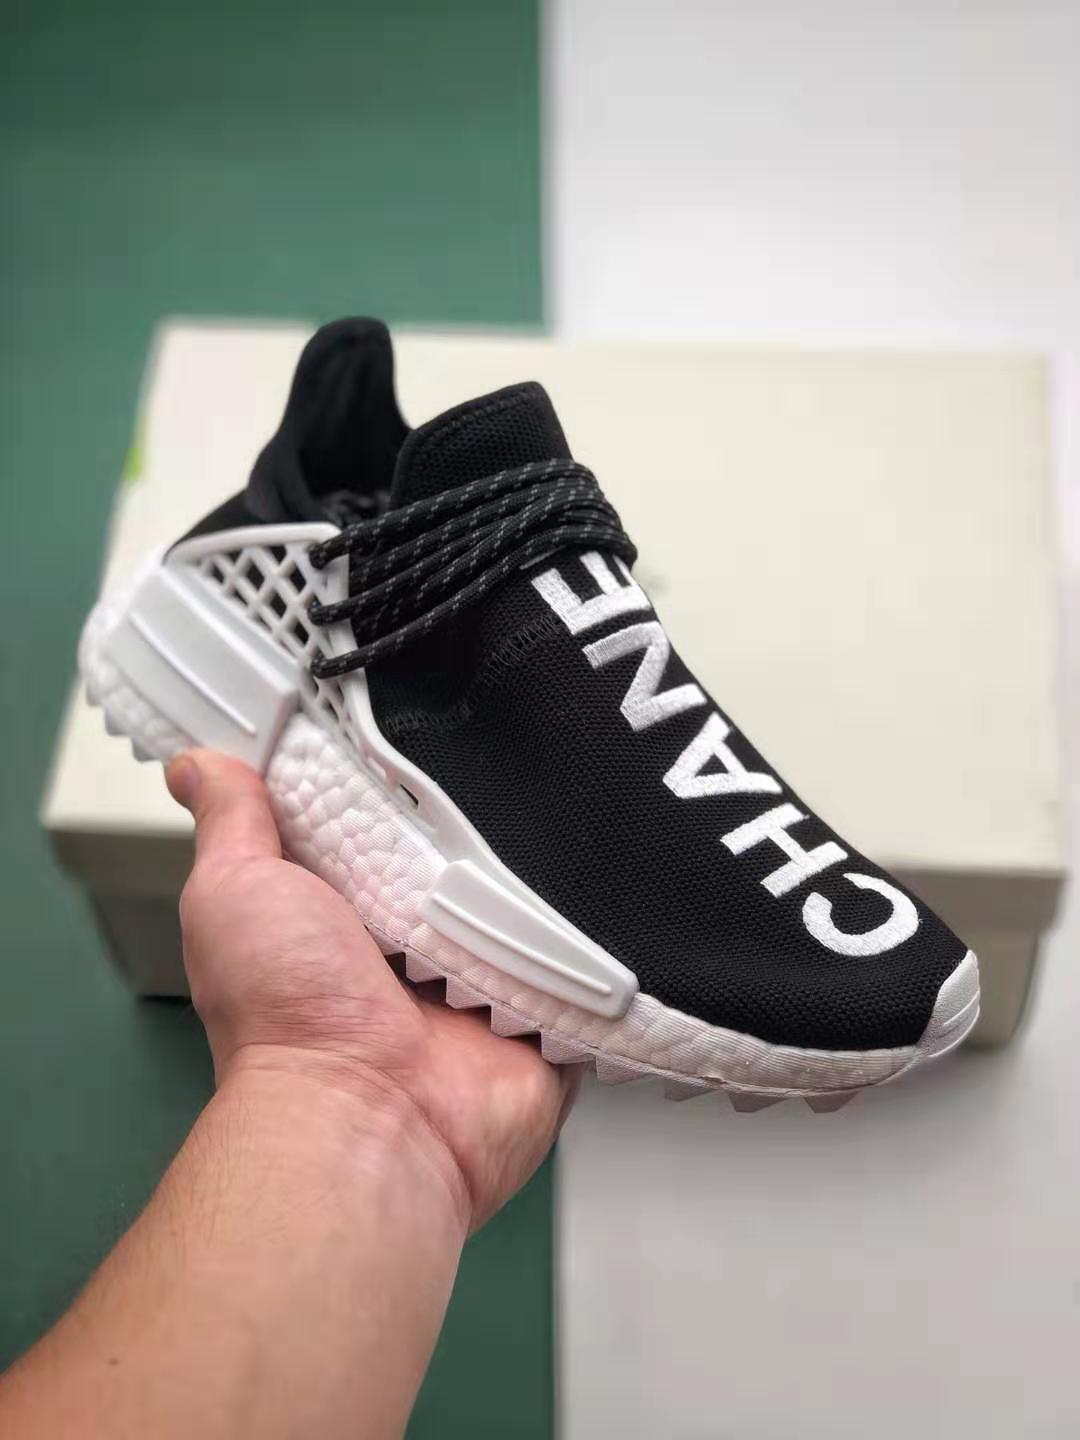 Adidas Pharrell x NMD Human Race Trail 'Equality' AC7033: Stylish and Comfortable Sneakers for All